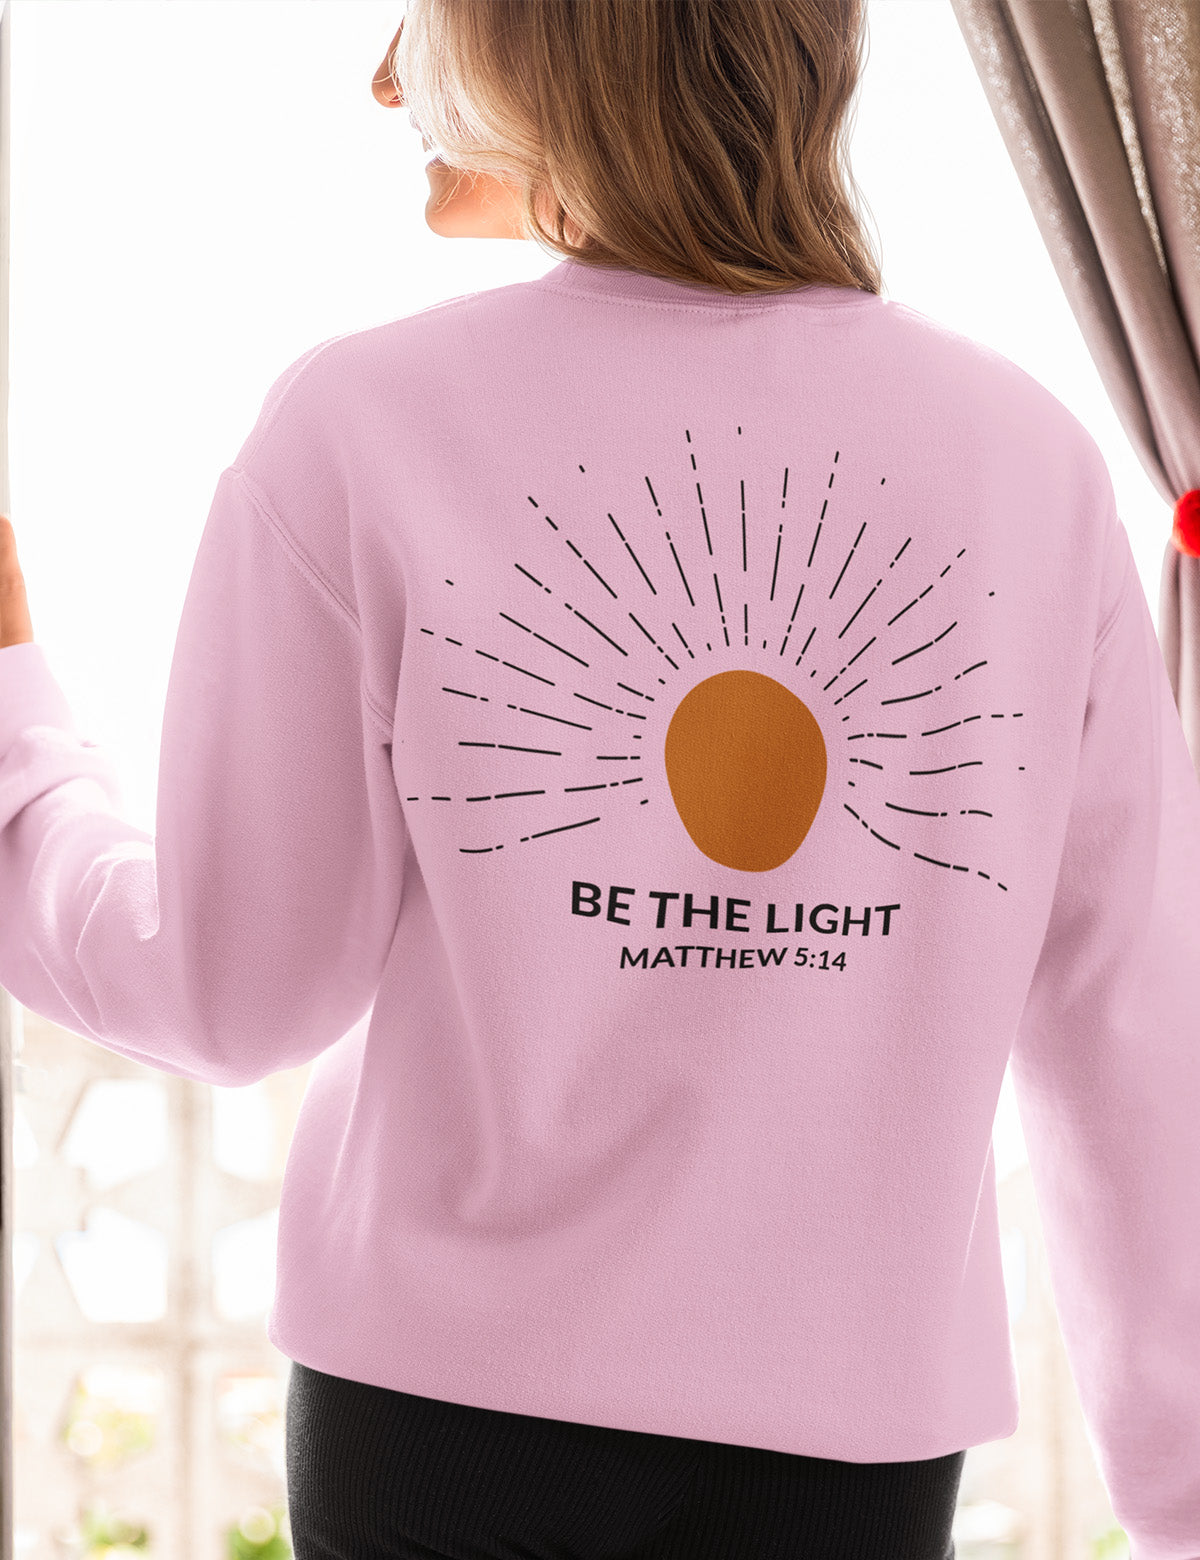 Be The Light Christian Religious Sweatshirts for women